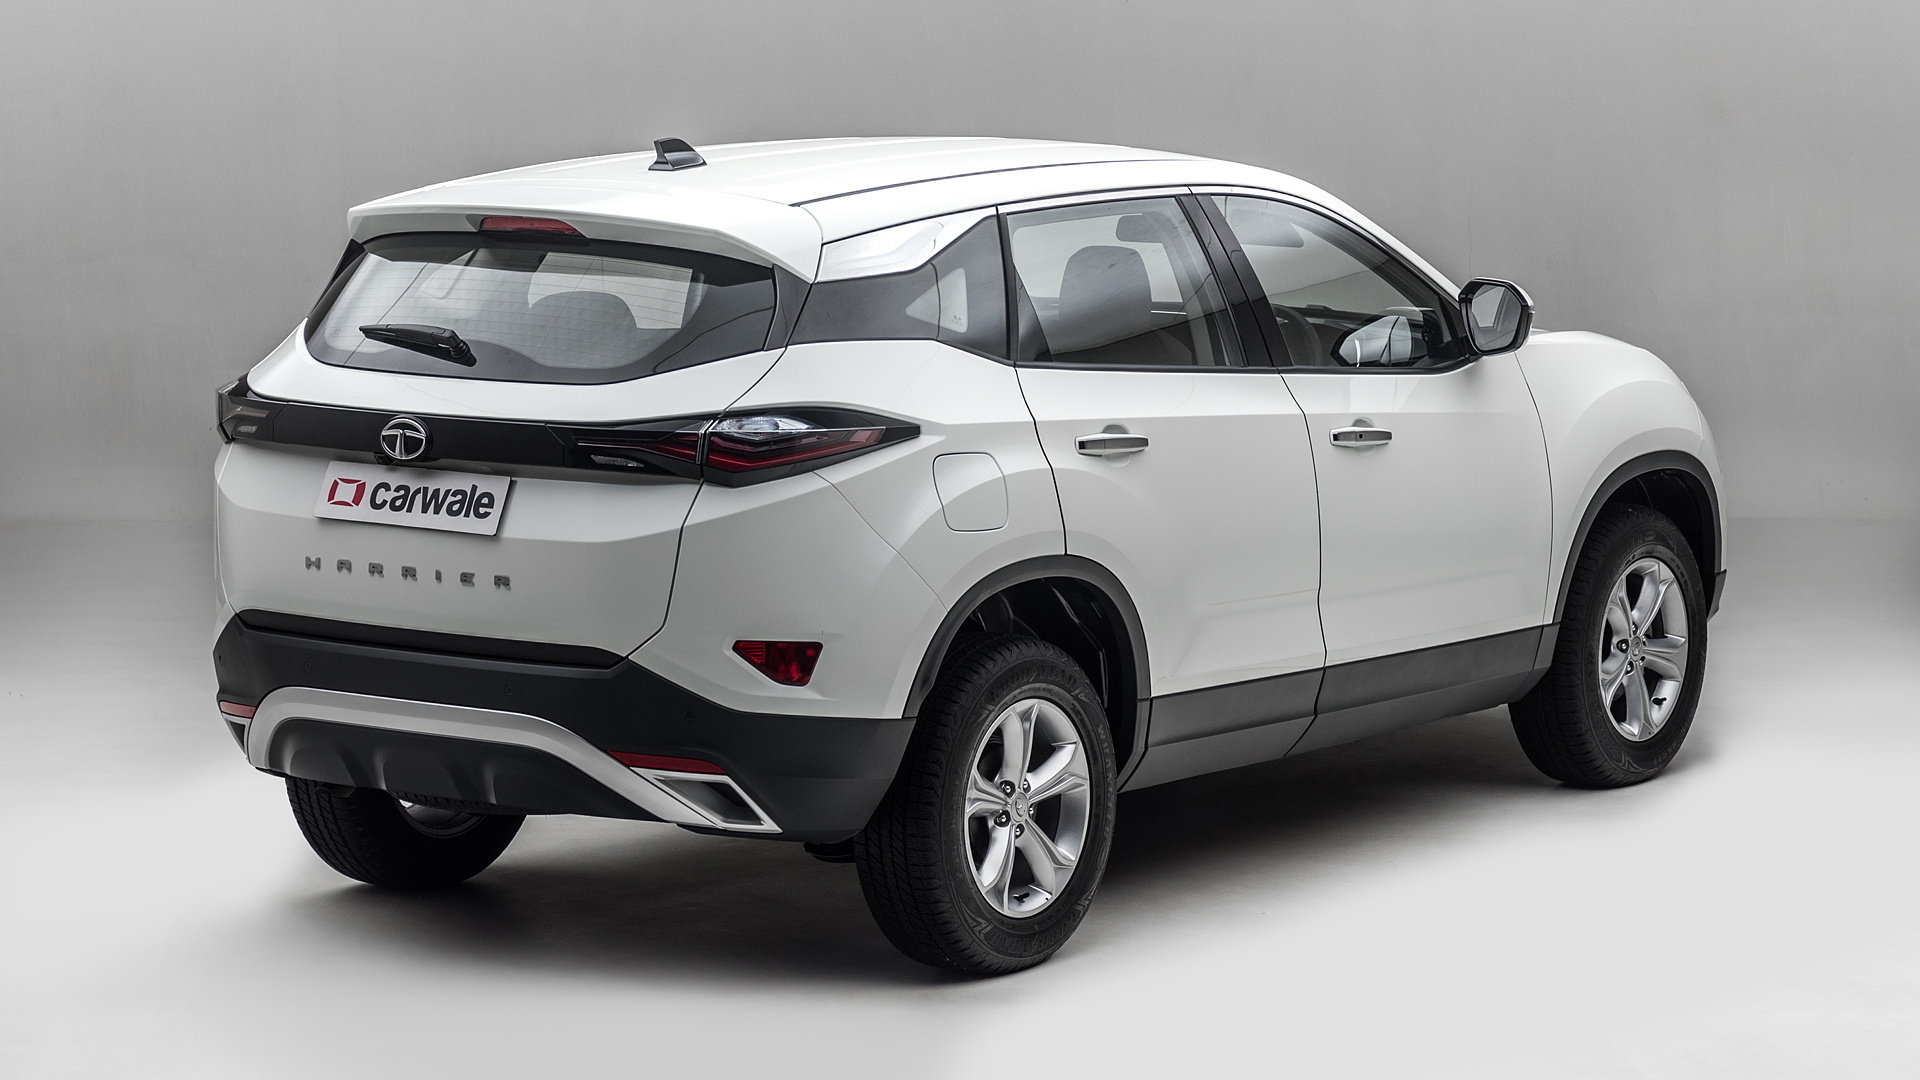 Tata Harrier Images - Interior \u0026 Exterior Photo Gallery 500+ Images - CarWale 1920x1080